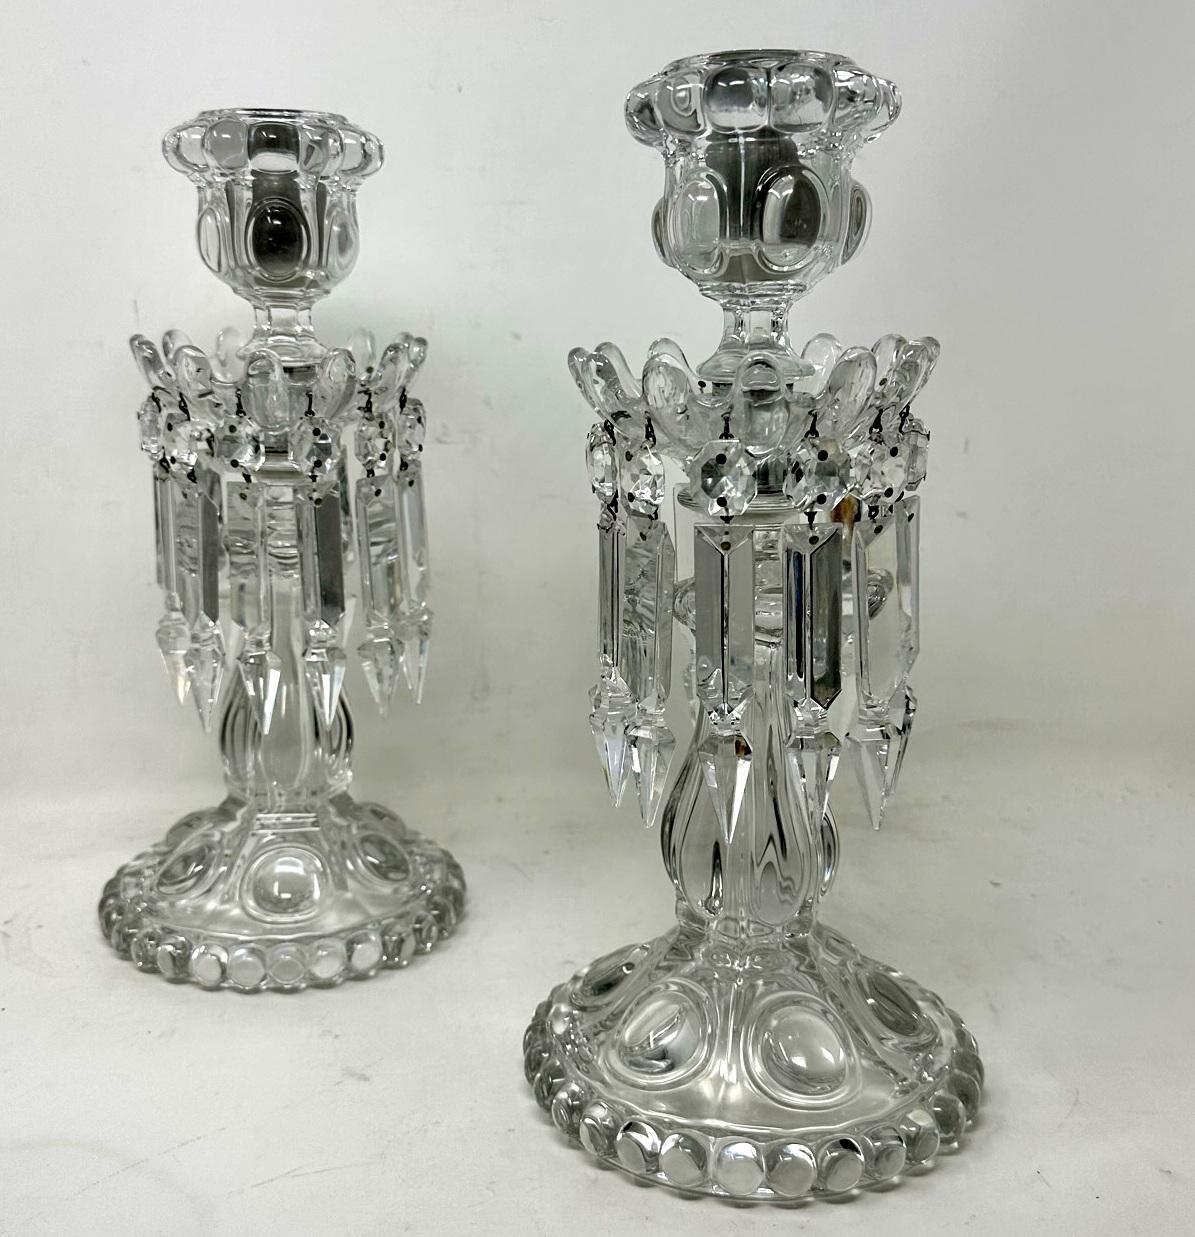 An Exceptionally Fine Example of a French Baccarat Pair of Regency Style Neoclassical Single Light Full Lead Hand Cut Candlesticks Lustres of generous proportions with stylish bulbous columns above dome shaped circular spreading bases with